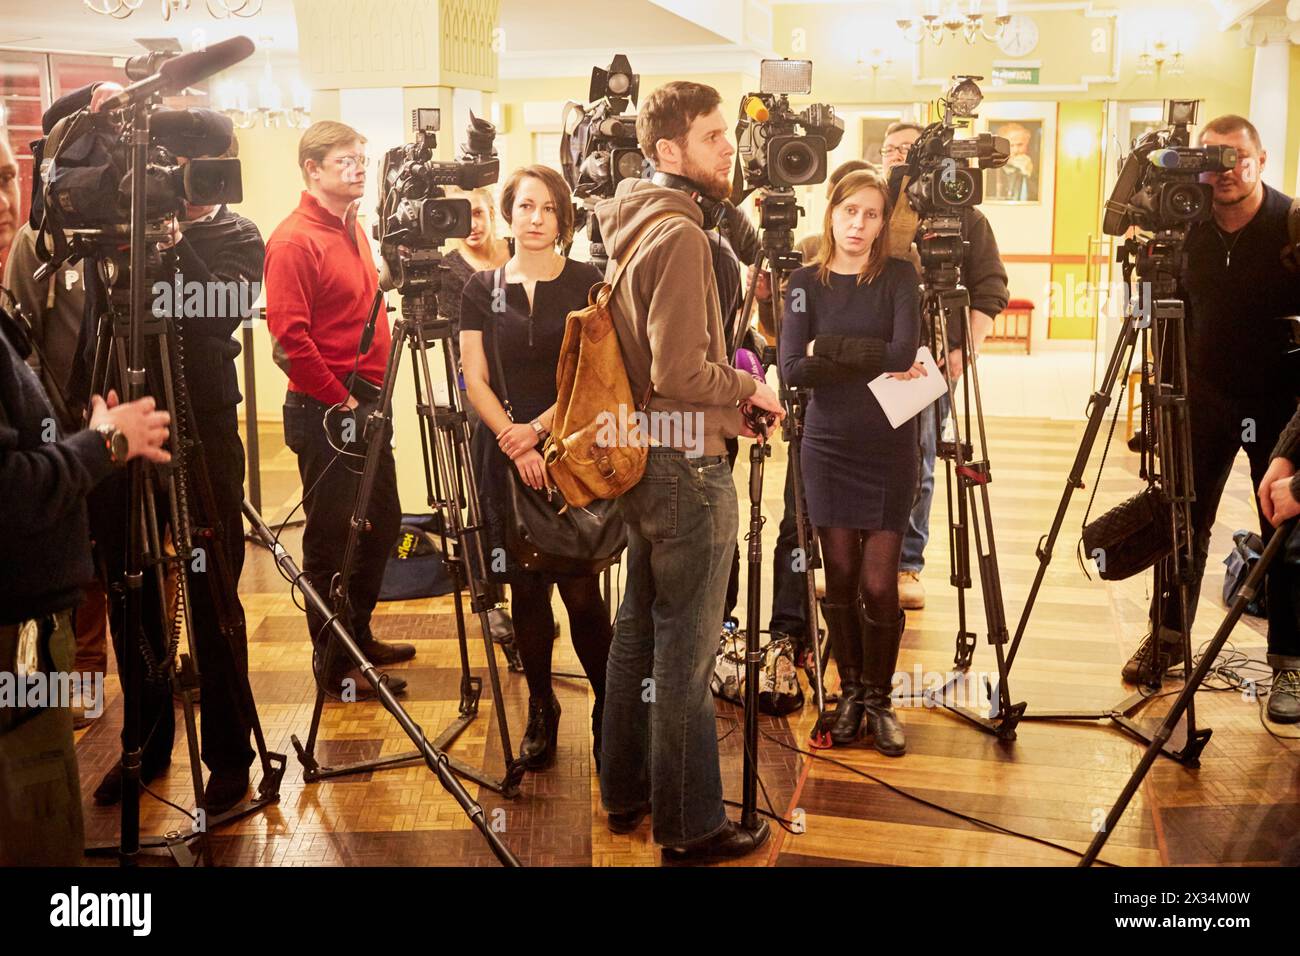 MOSCOW, RUSSIA - JAN 15, 2015: Journalists and cameramen stand in foyer before interviews after media preview of Boris Godunov directed by Peter Stein Stock Photo